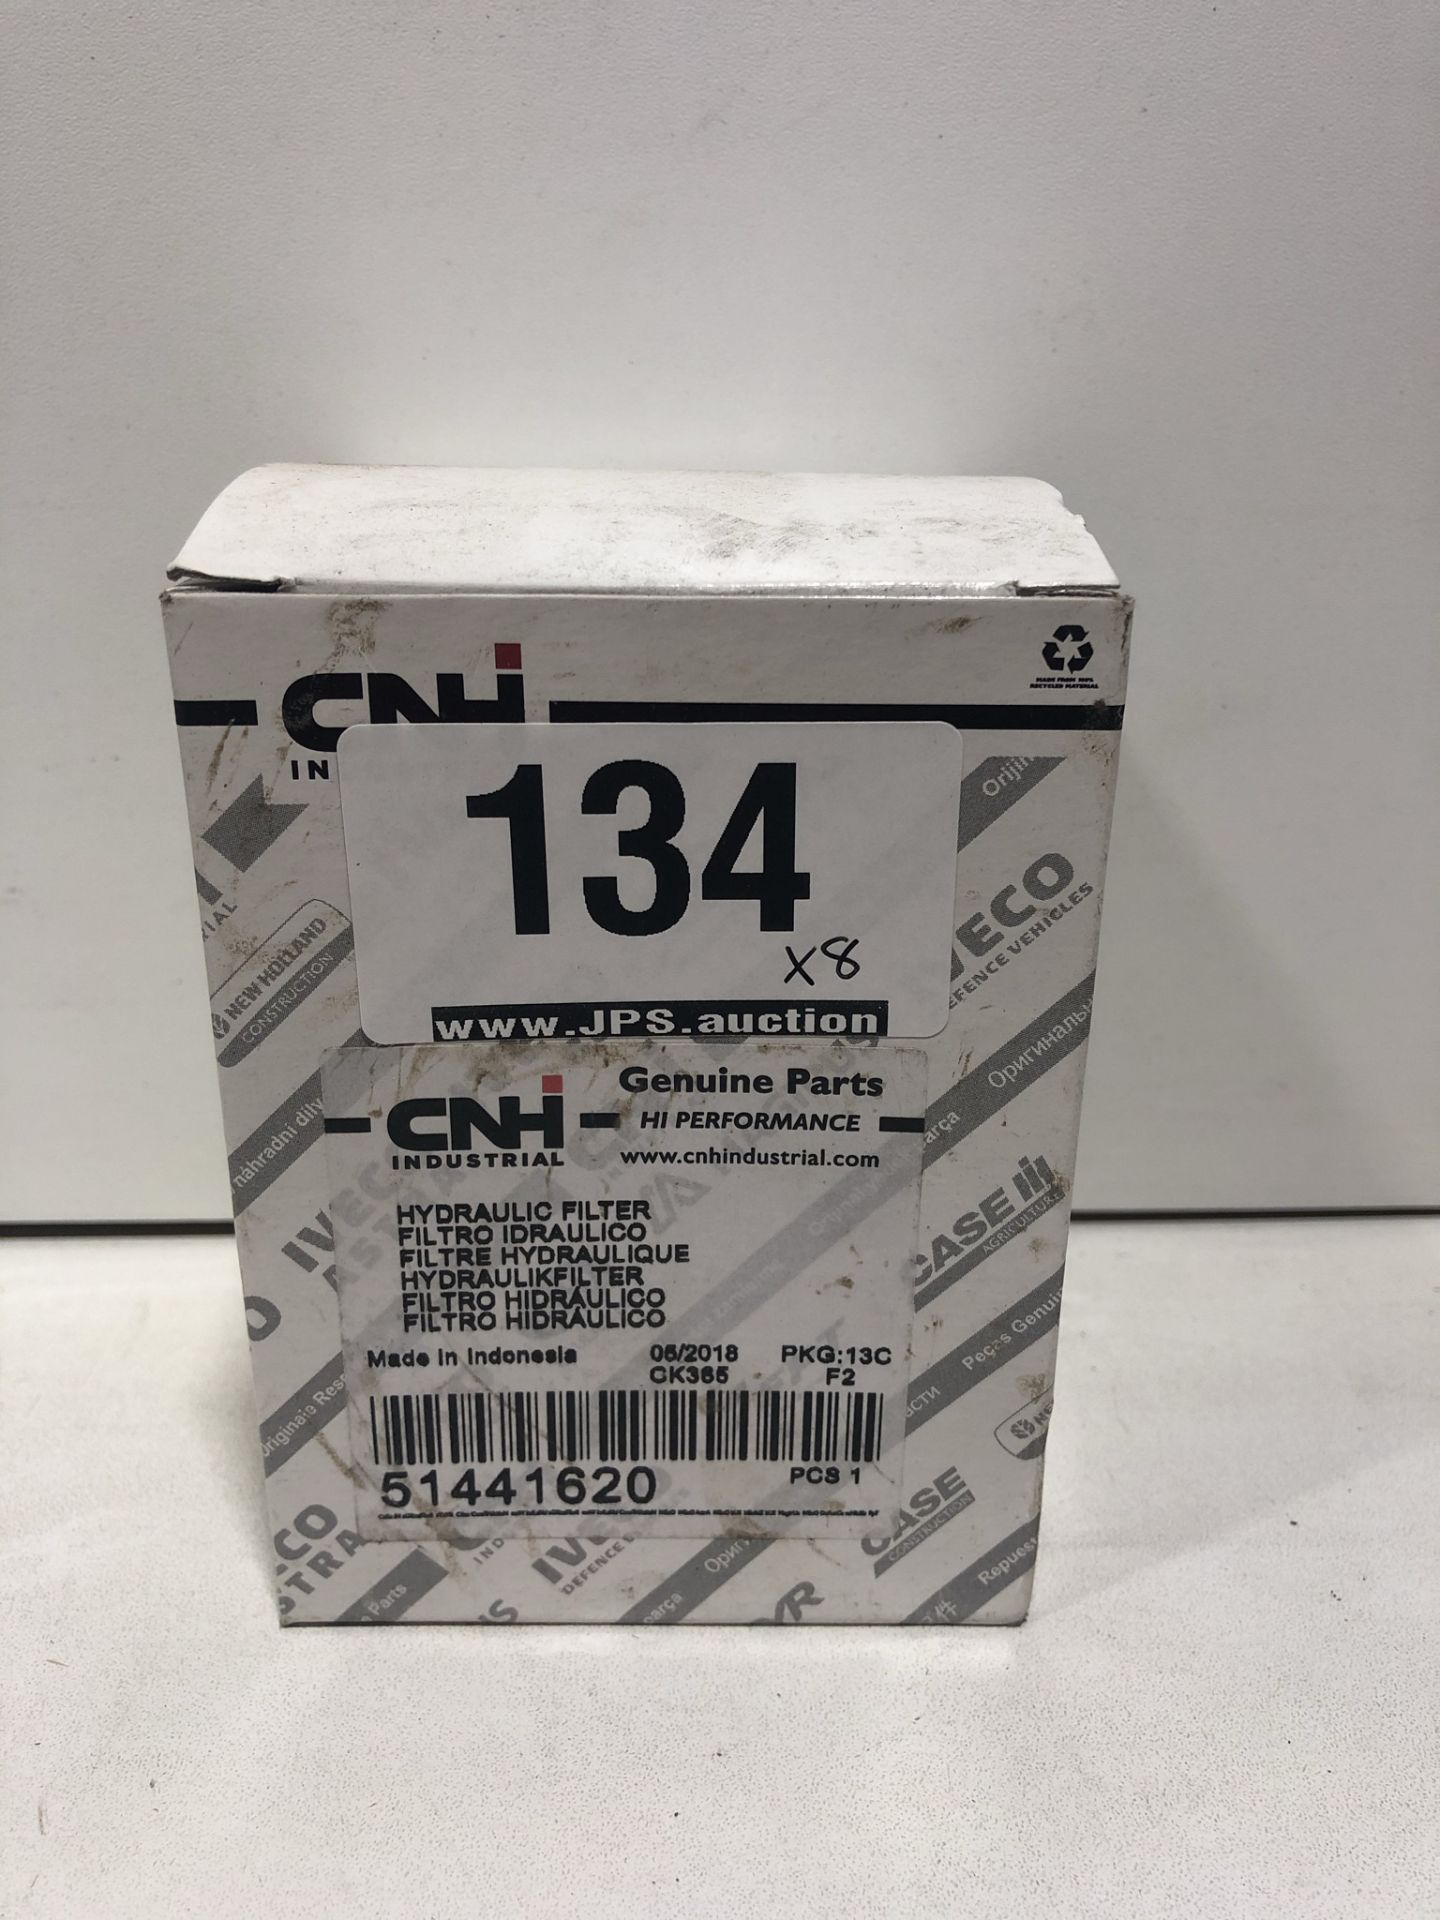 8 x CNH Hydraulic Filters - Image 3 of 5